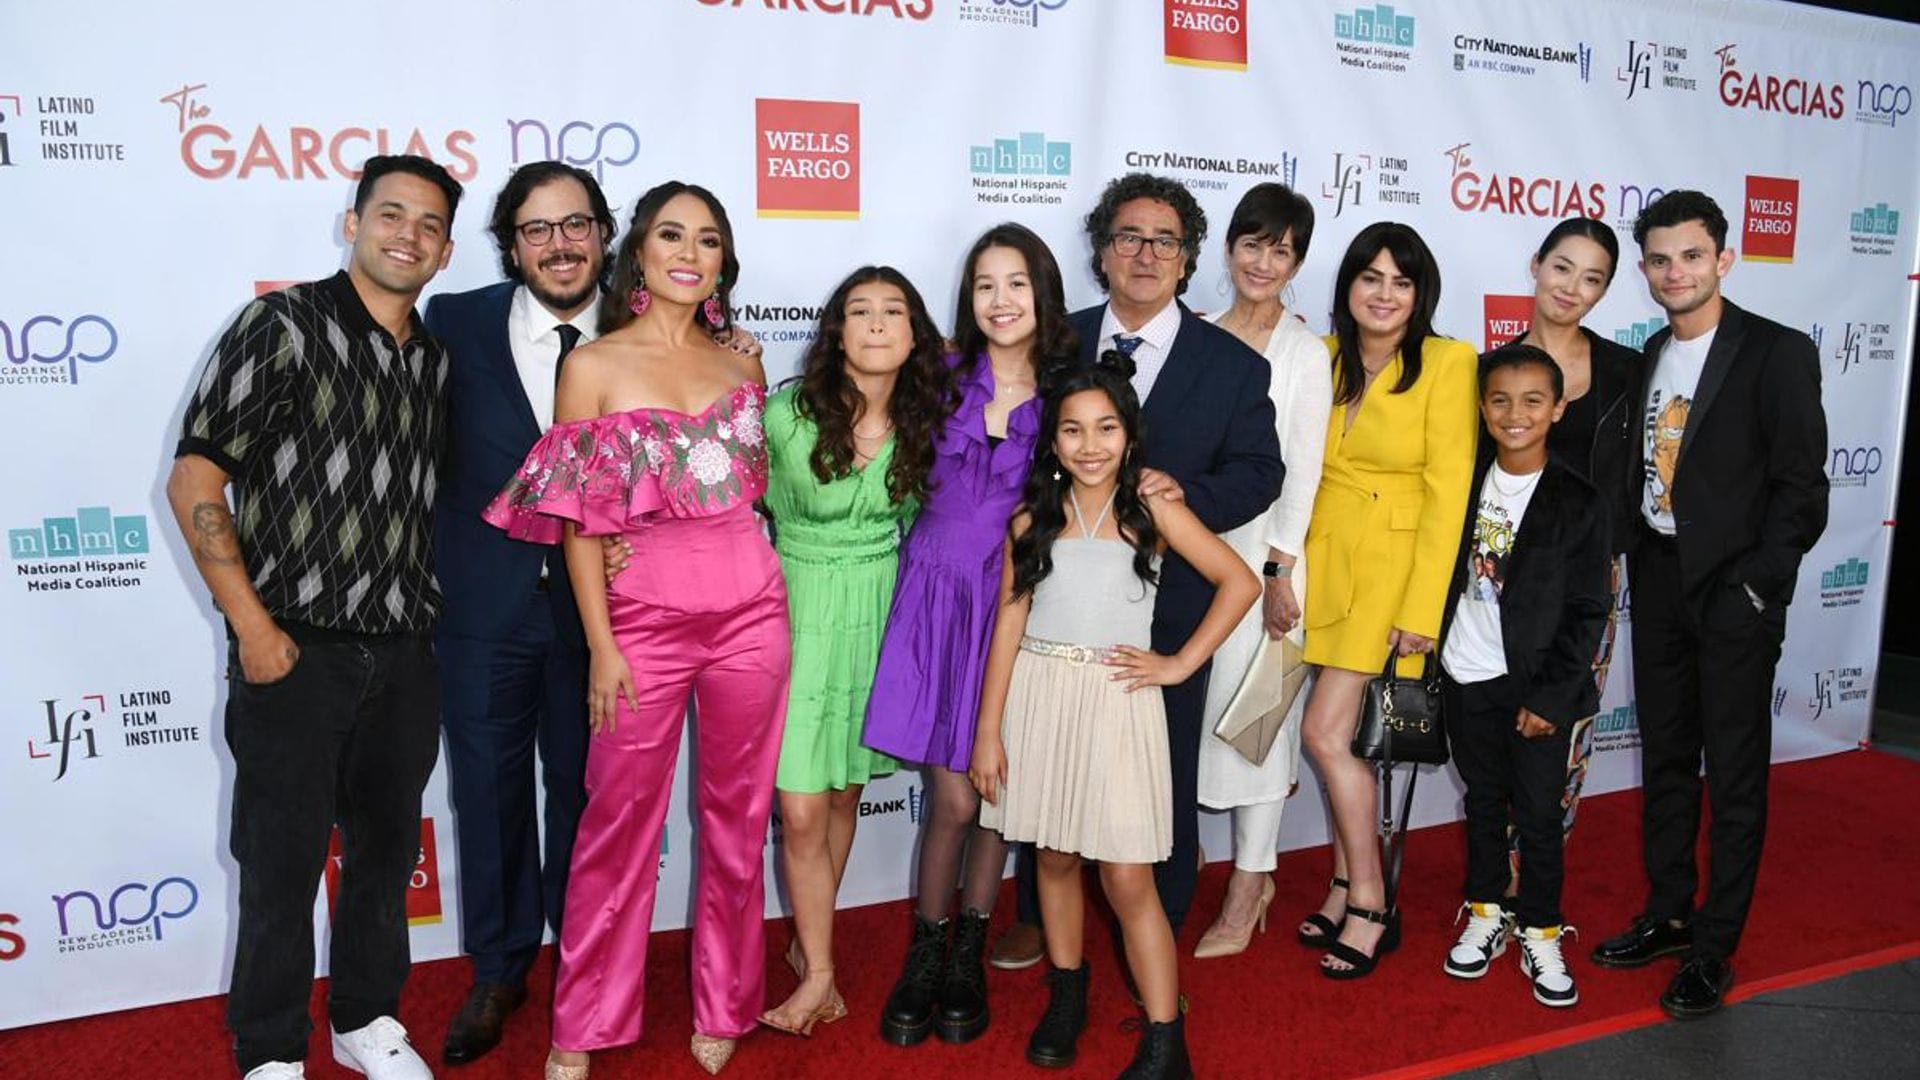 Los Angeles Premiere For HBO Max's New Show "The Garcias"